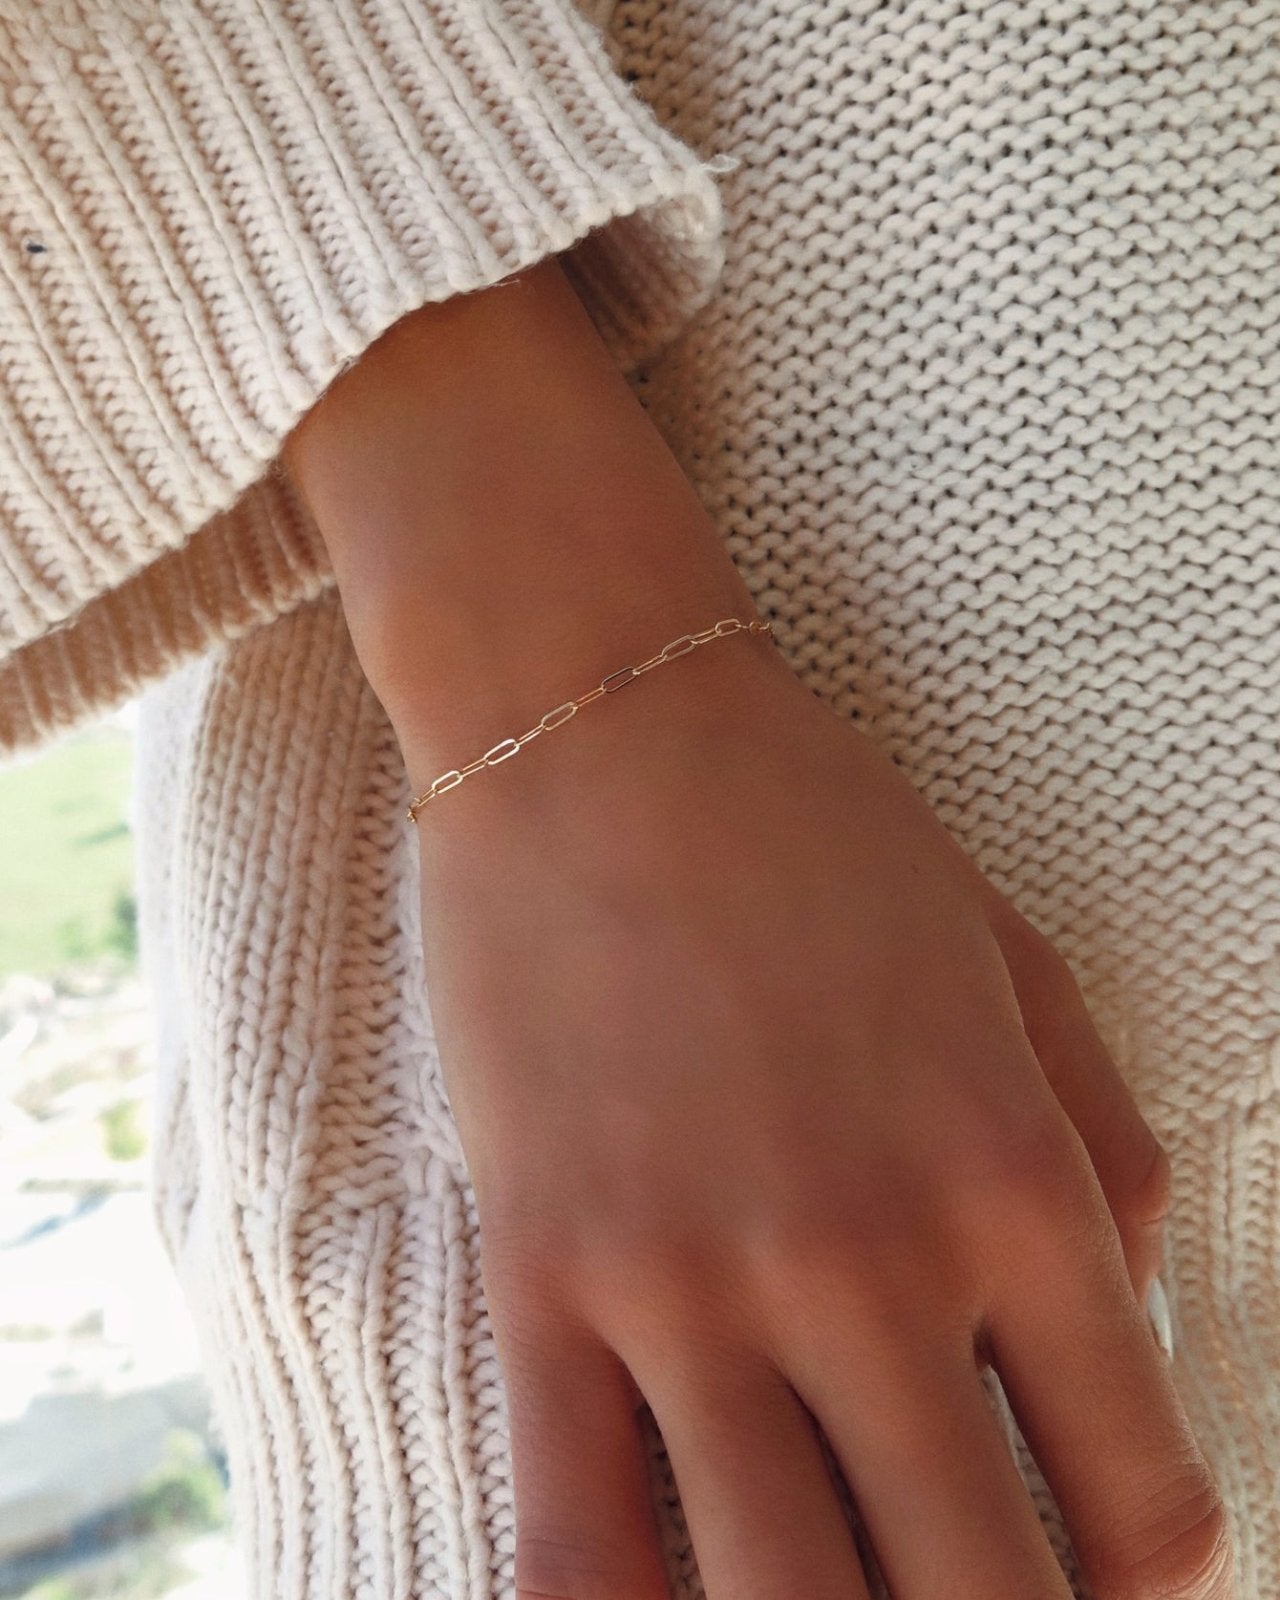 DRAWN CABLE BRACELET - The Littl - Sterling Silver - 16cm